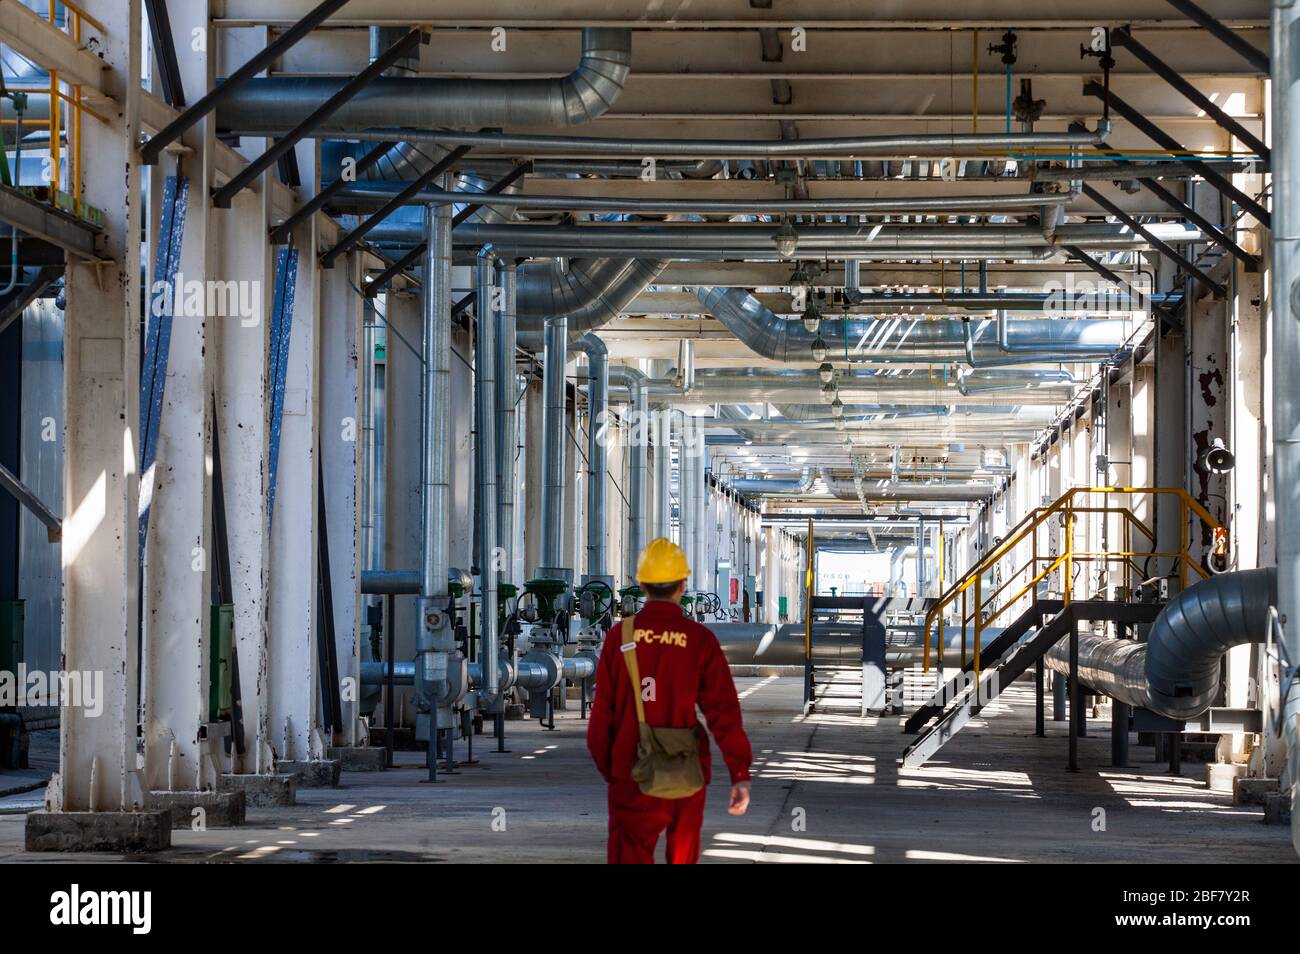 Aktobe region/Kazakhstan - May 04 2012: Refinery worker in red work wear and yellow helmet under the pipelines. Oil refinery plant. CNPC-AMG company. Stock Photo